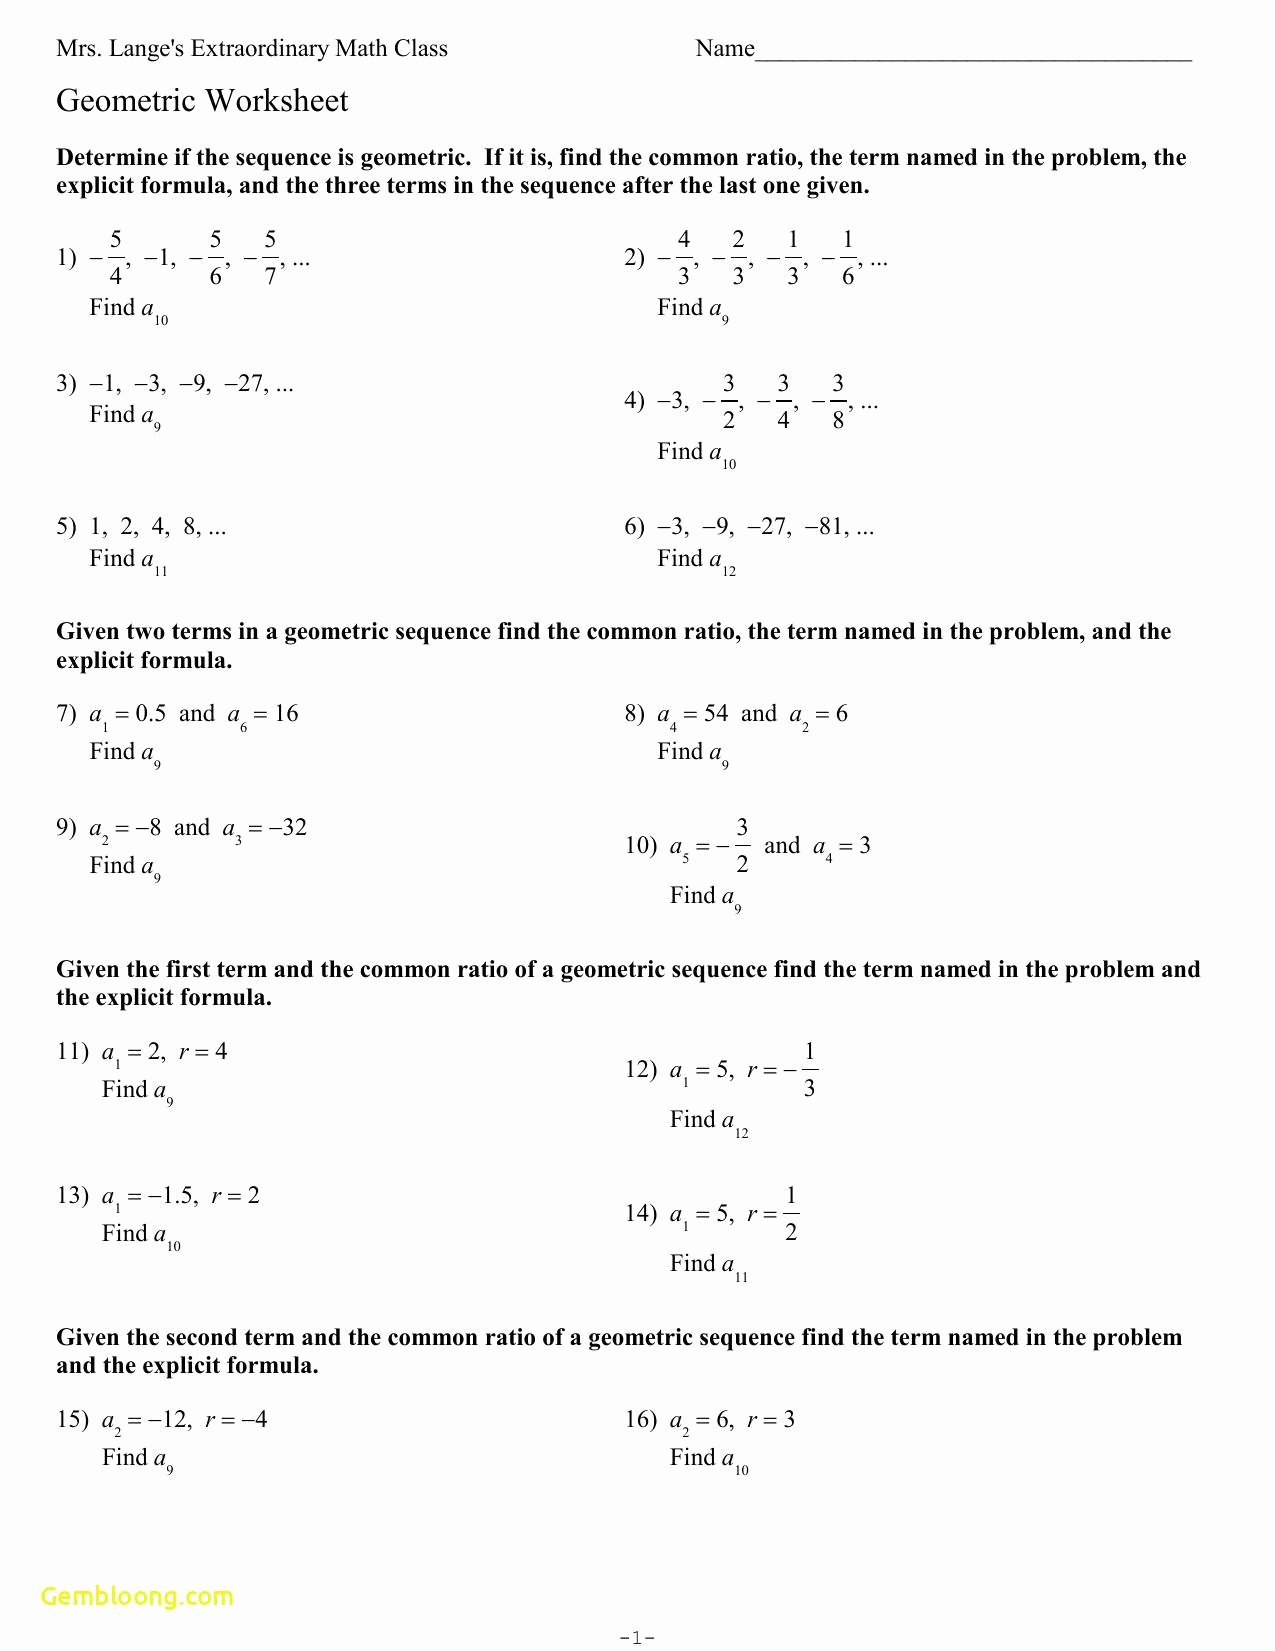 Arithmetic Sequences Worksheet Answers Awesome Geometric Sequences and Series Worksheet Answers